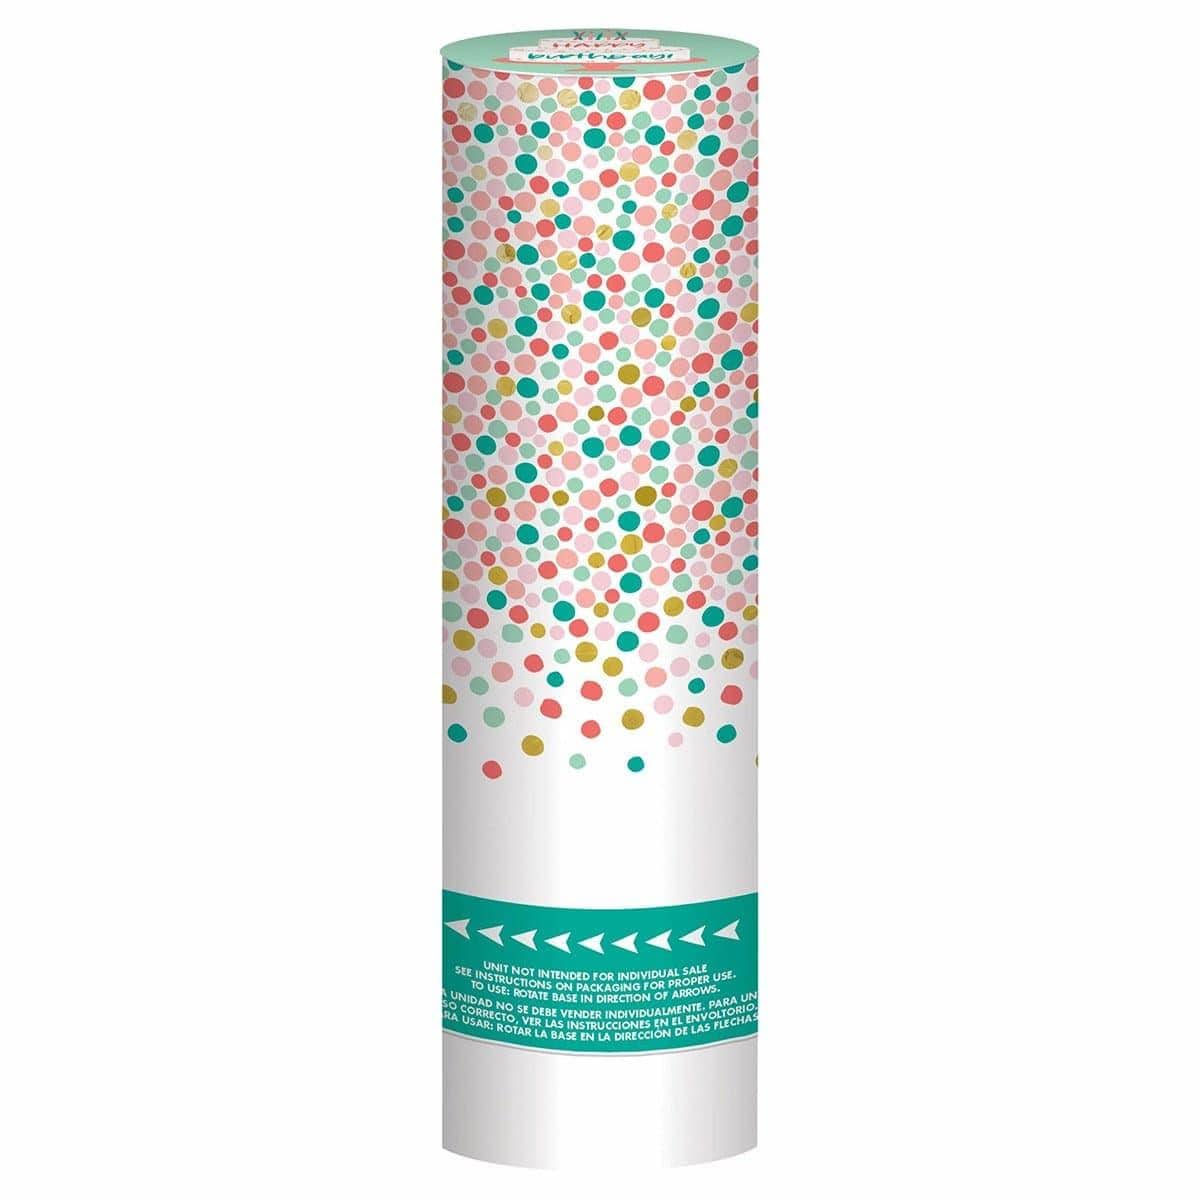 Buy General Birthday Happy Cake Day Confetti Popper, 2 Count sold at Party Expert